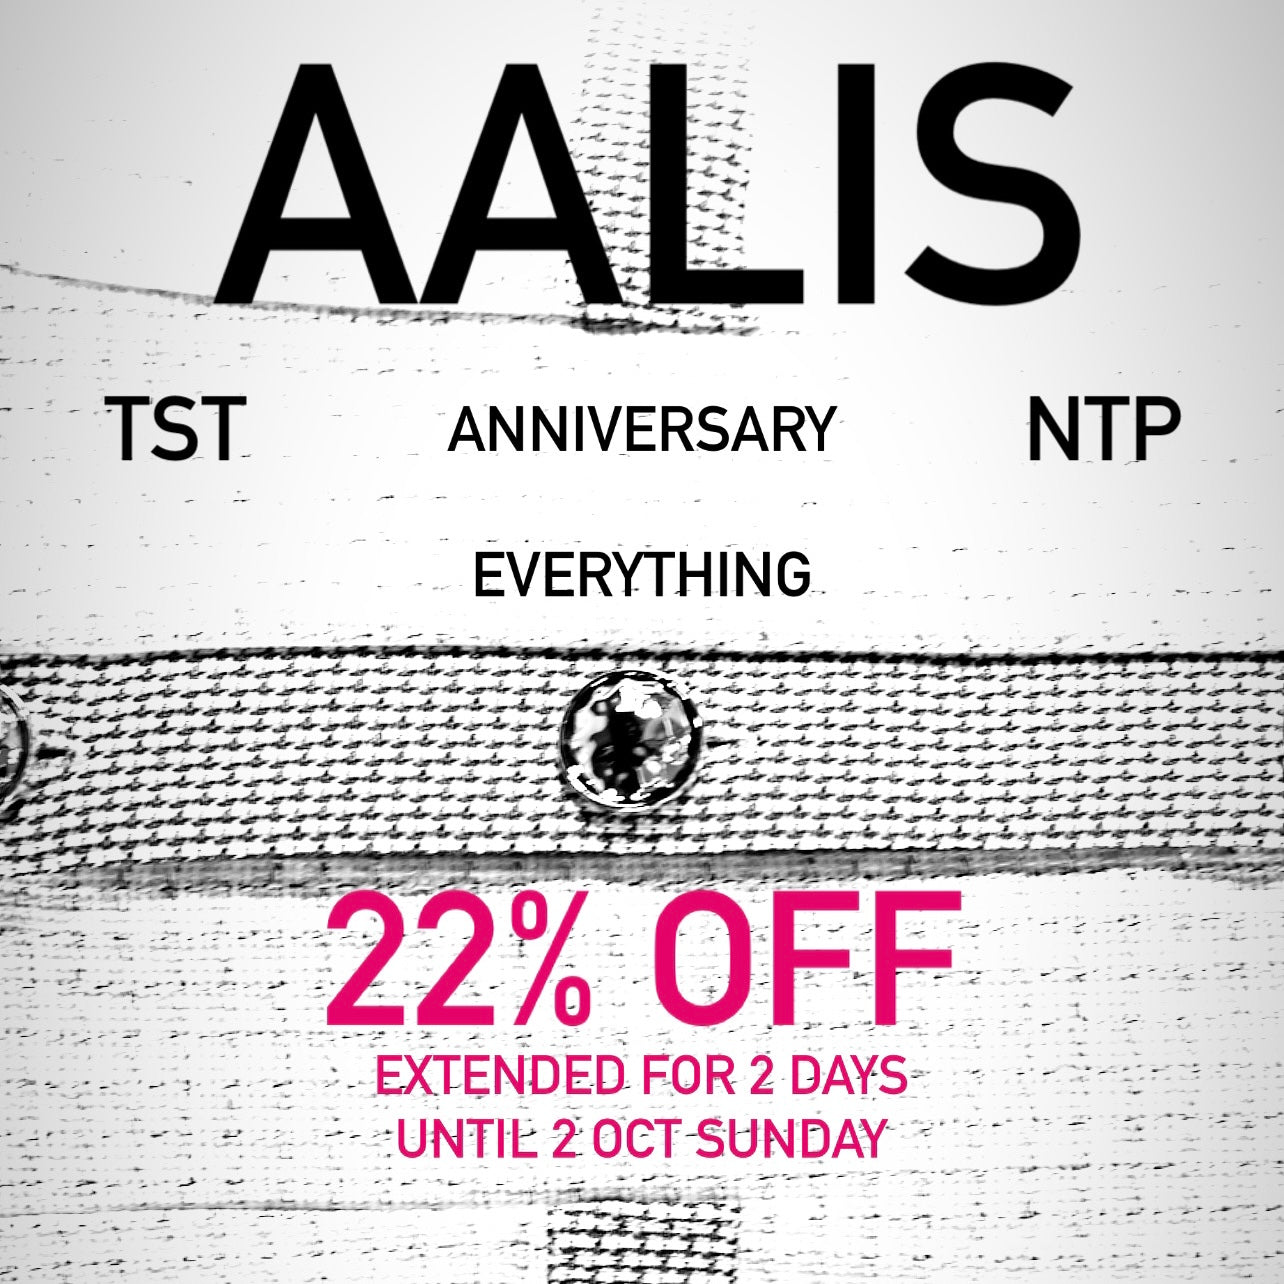 22% OFF SITEWIDE EXTENDED TILL 2 OCT